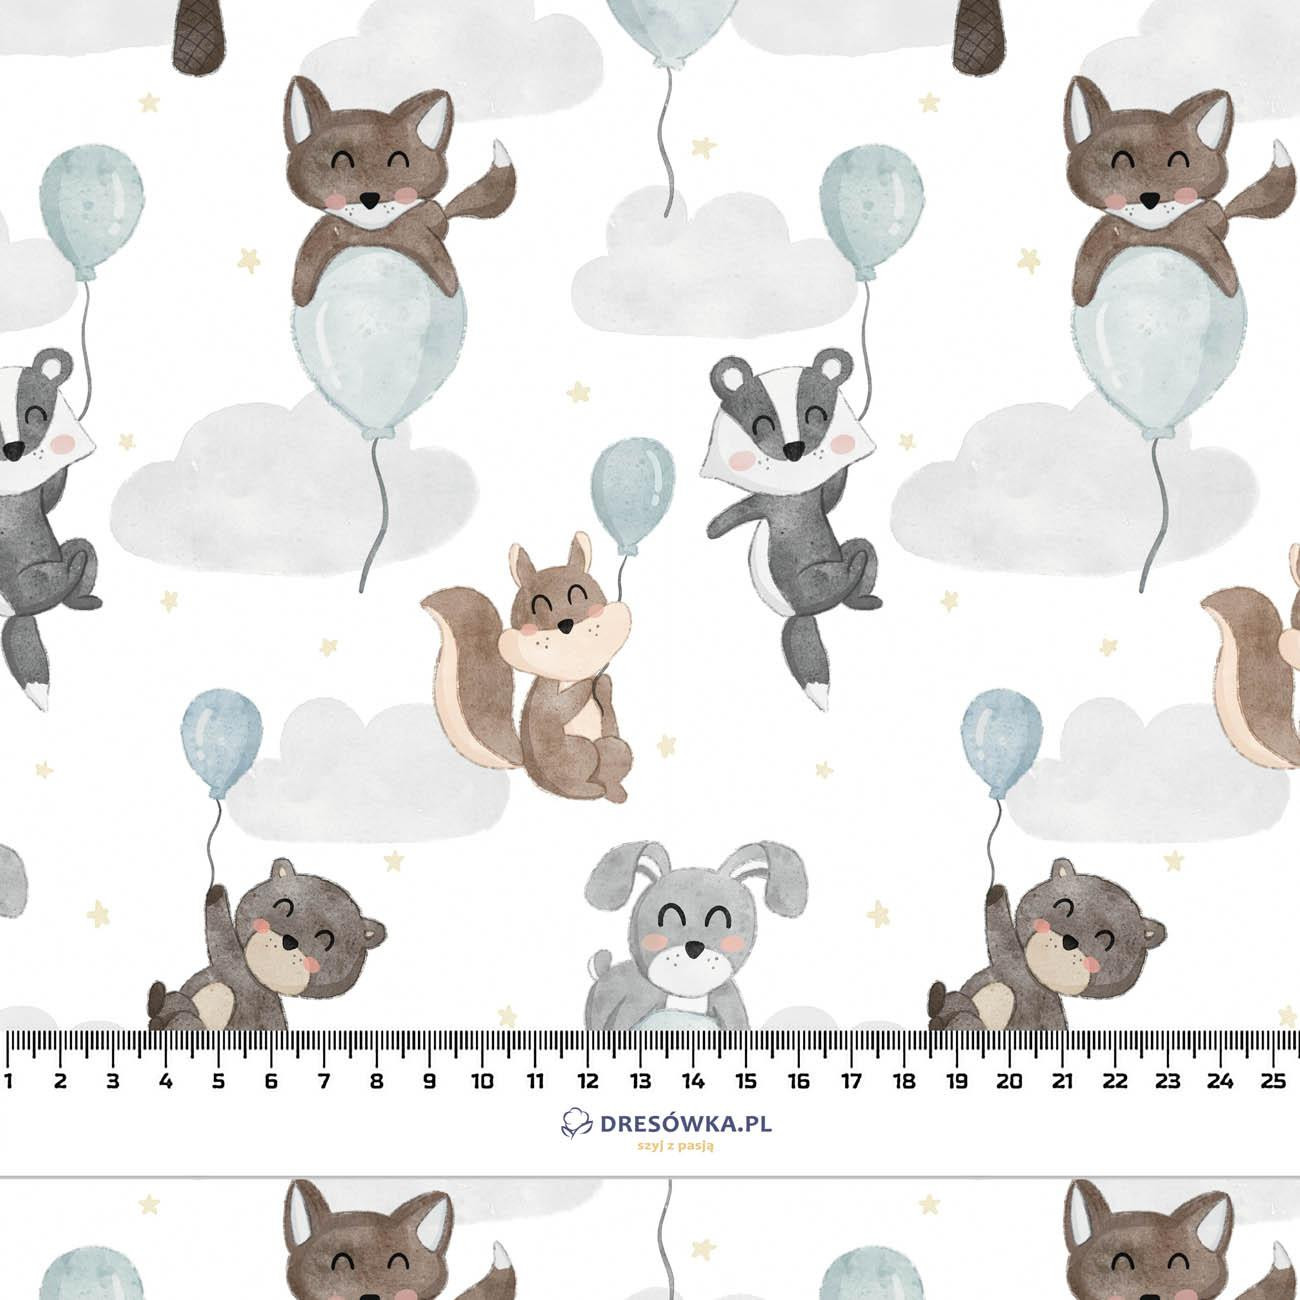 ANIMALS IN CLOUDS pat. 2 - Waterproof woven fabric